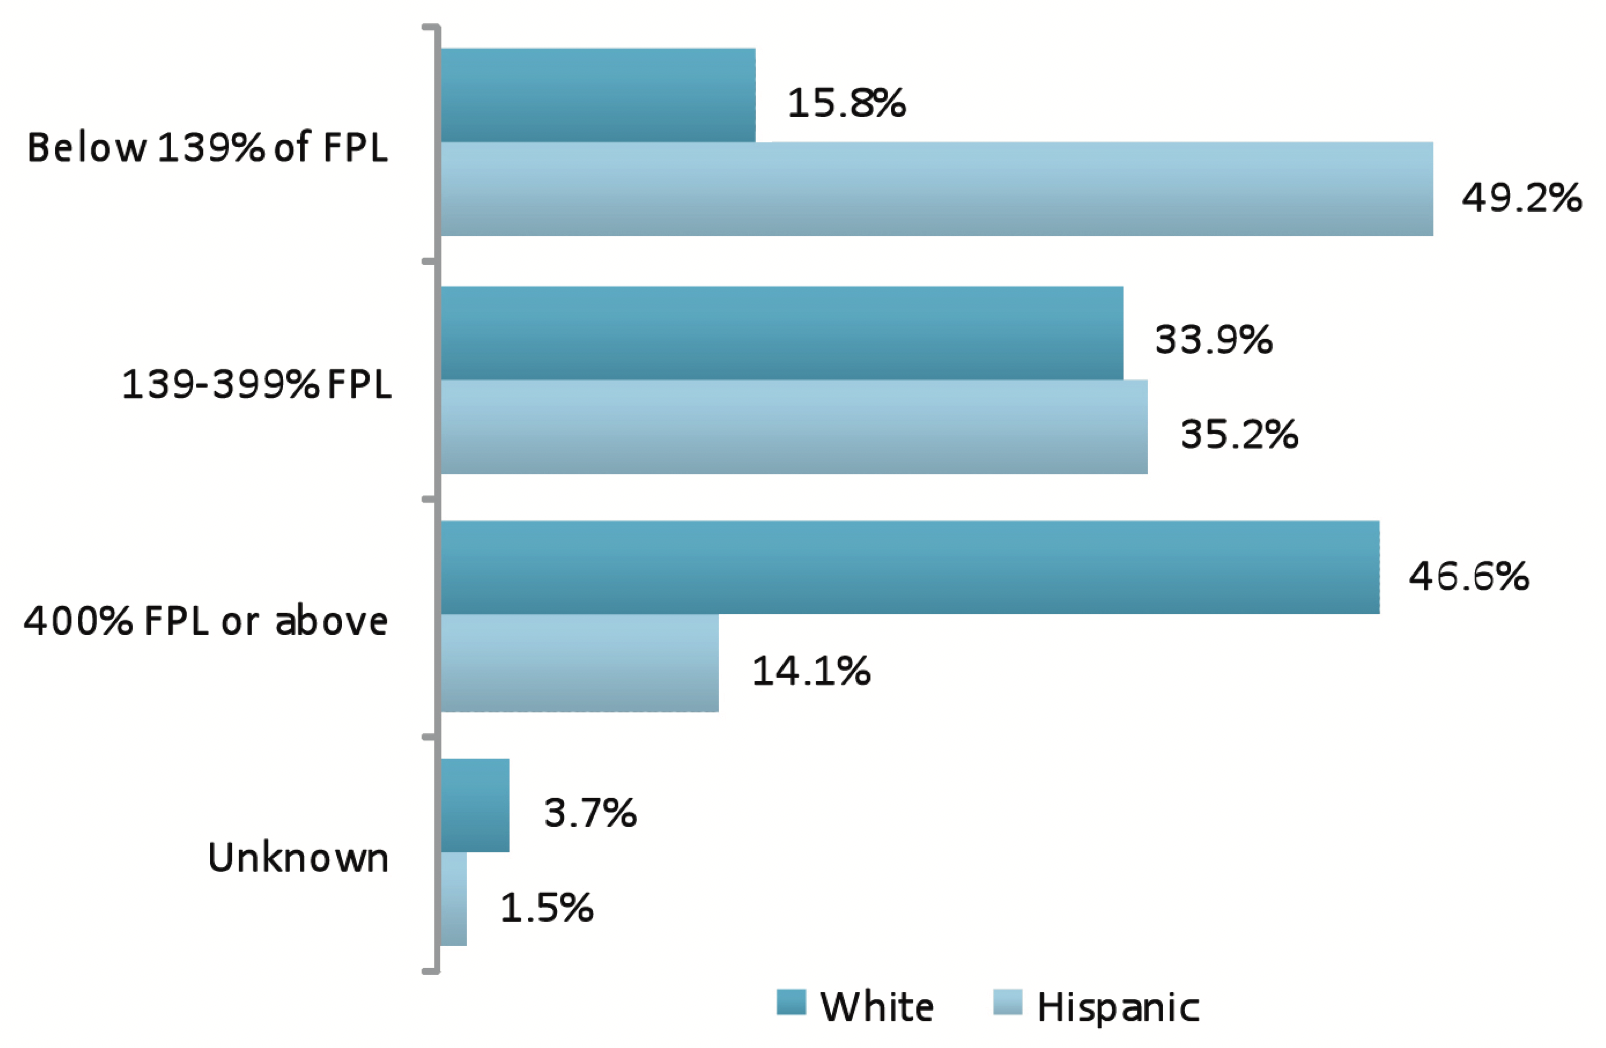 This graph compares family income of the white and Hispanic populations.